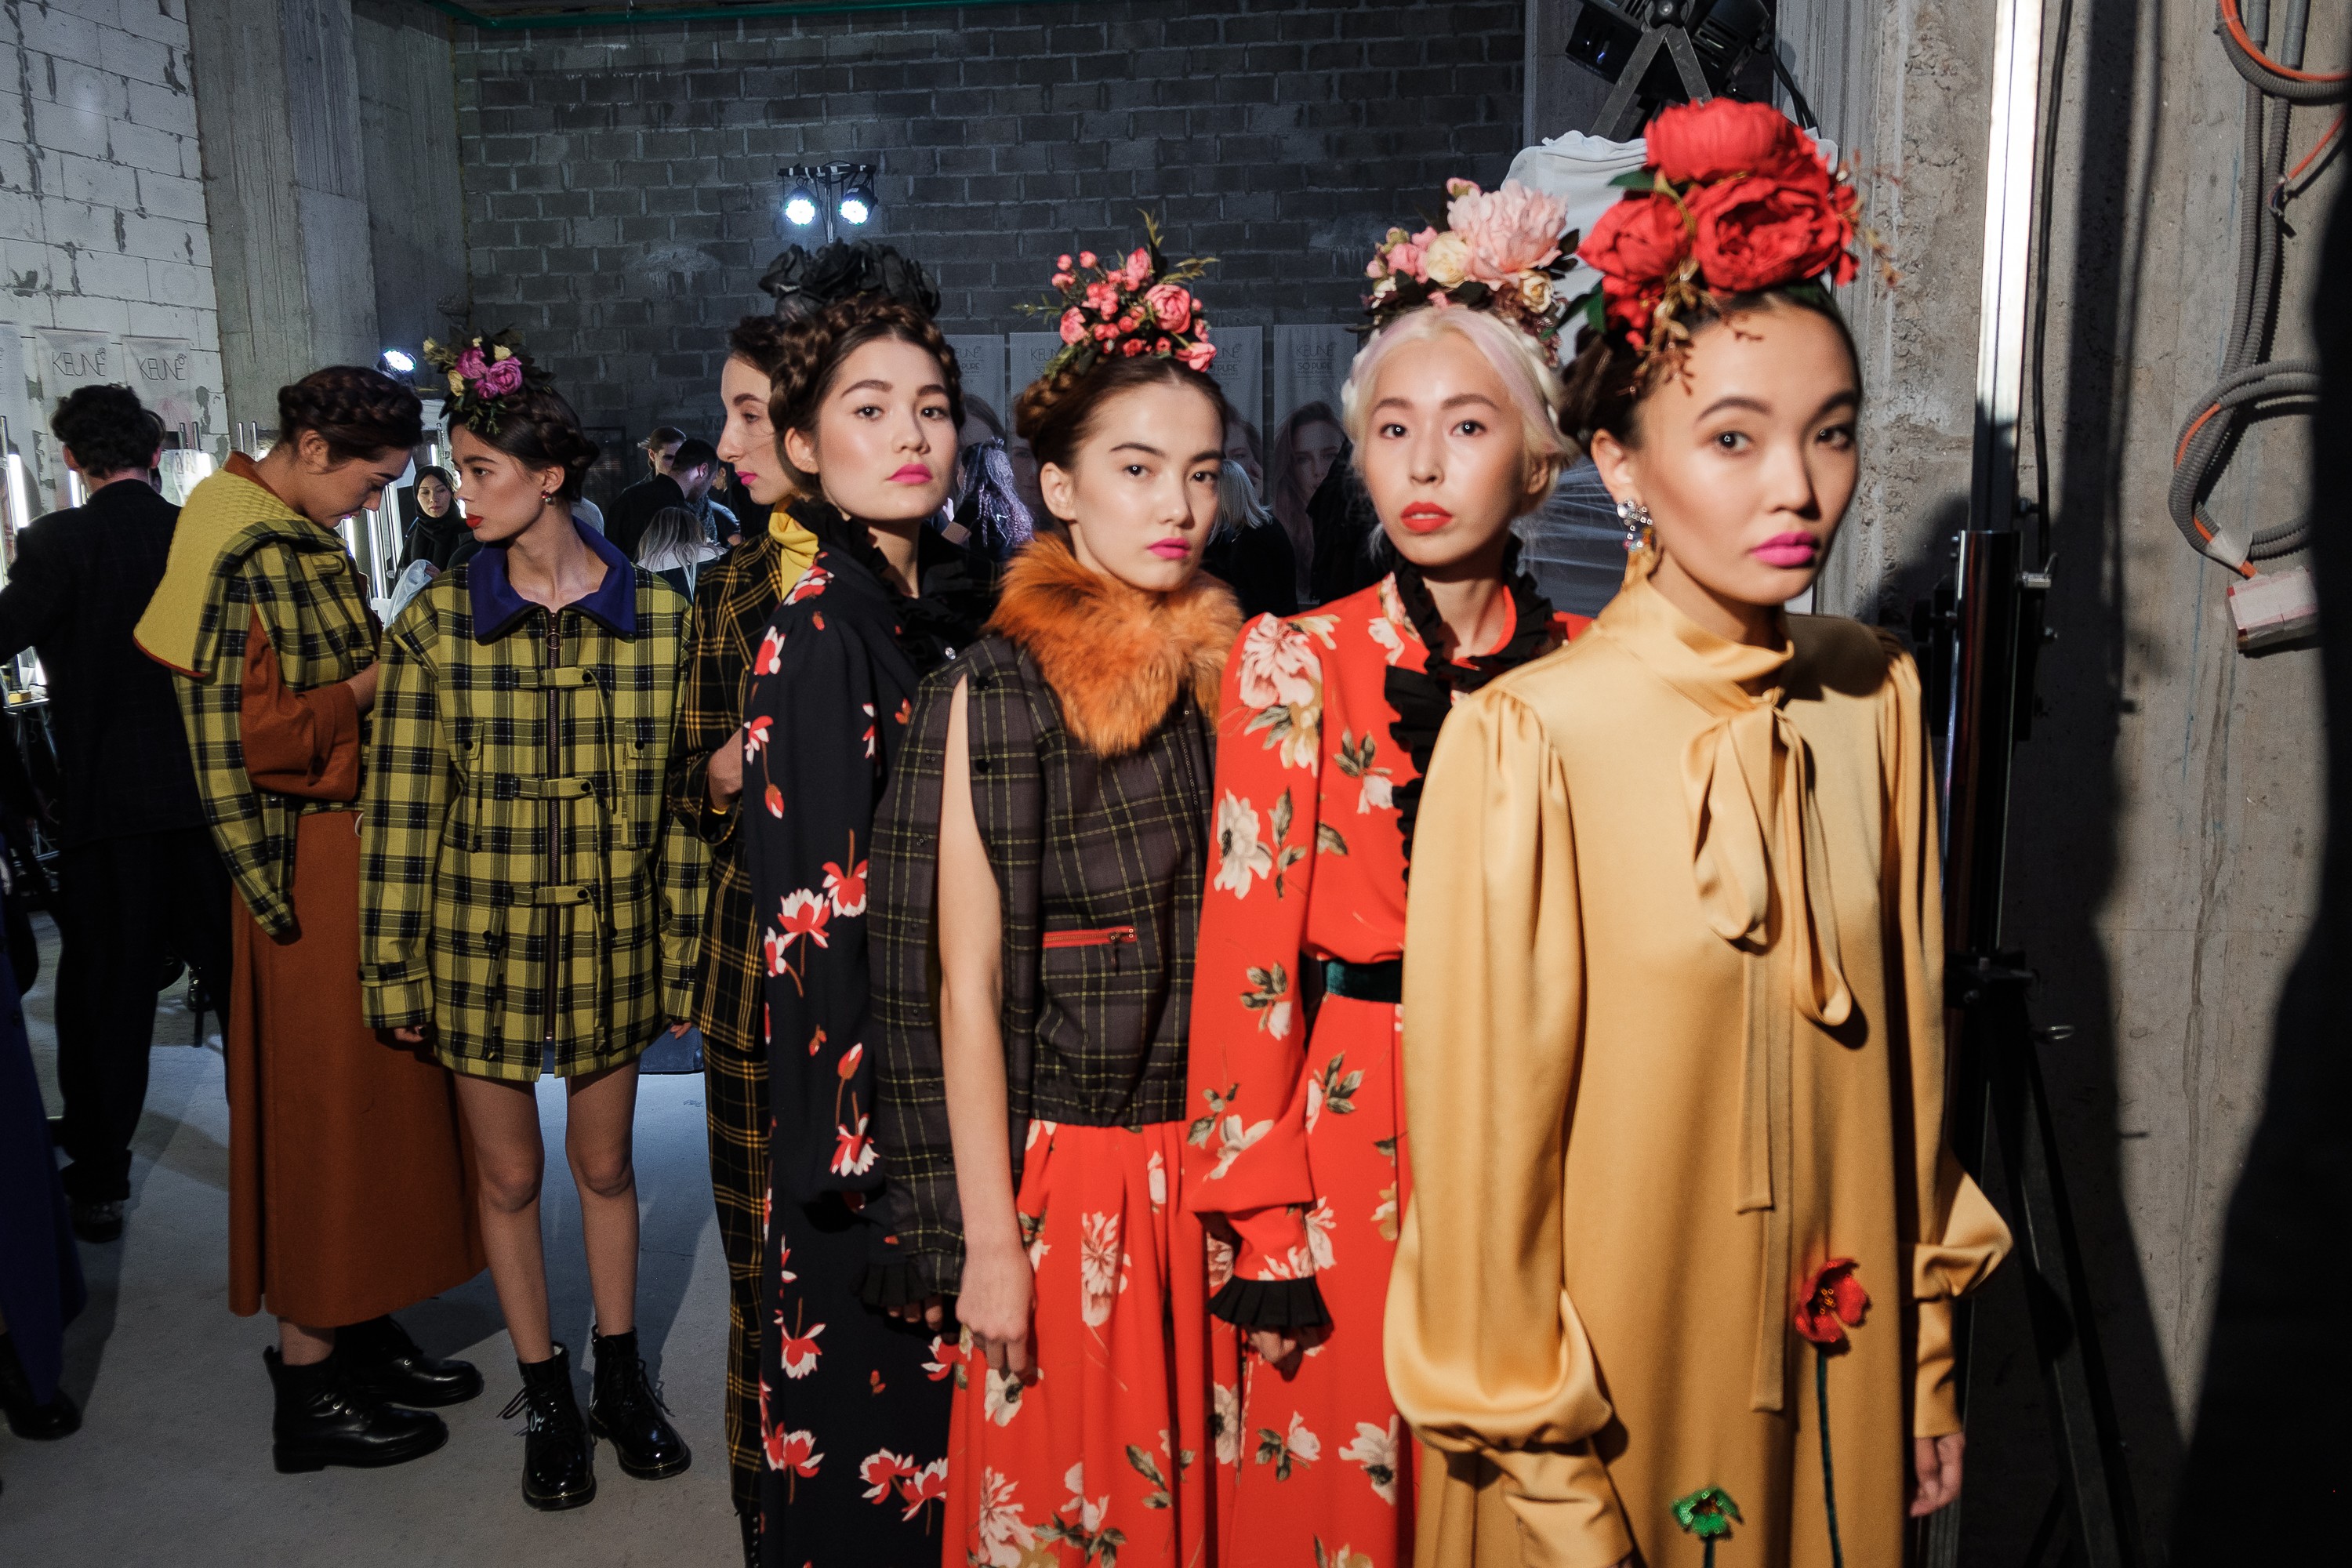 Models for the Kirpi show lining up during Almaty Fashion Week in 2018 in Kazakhstan.